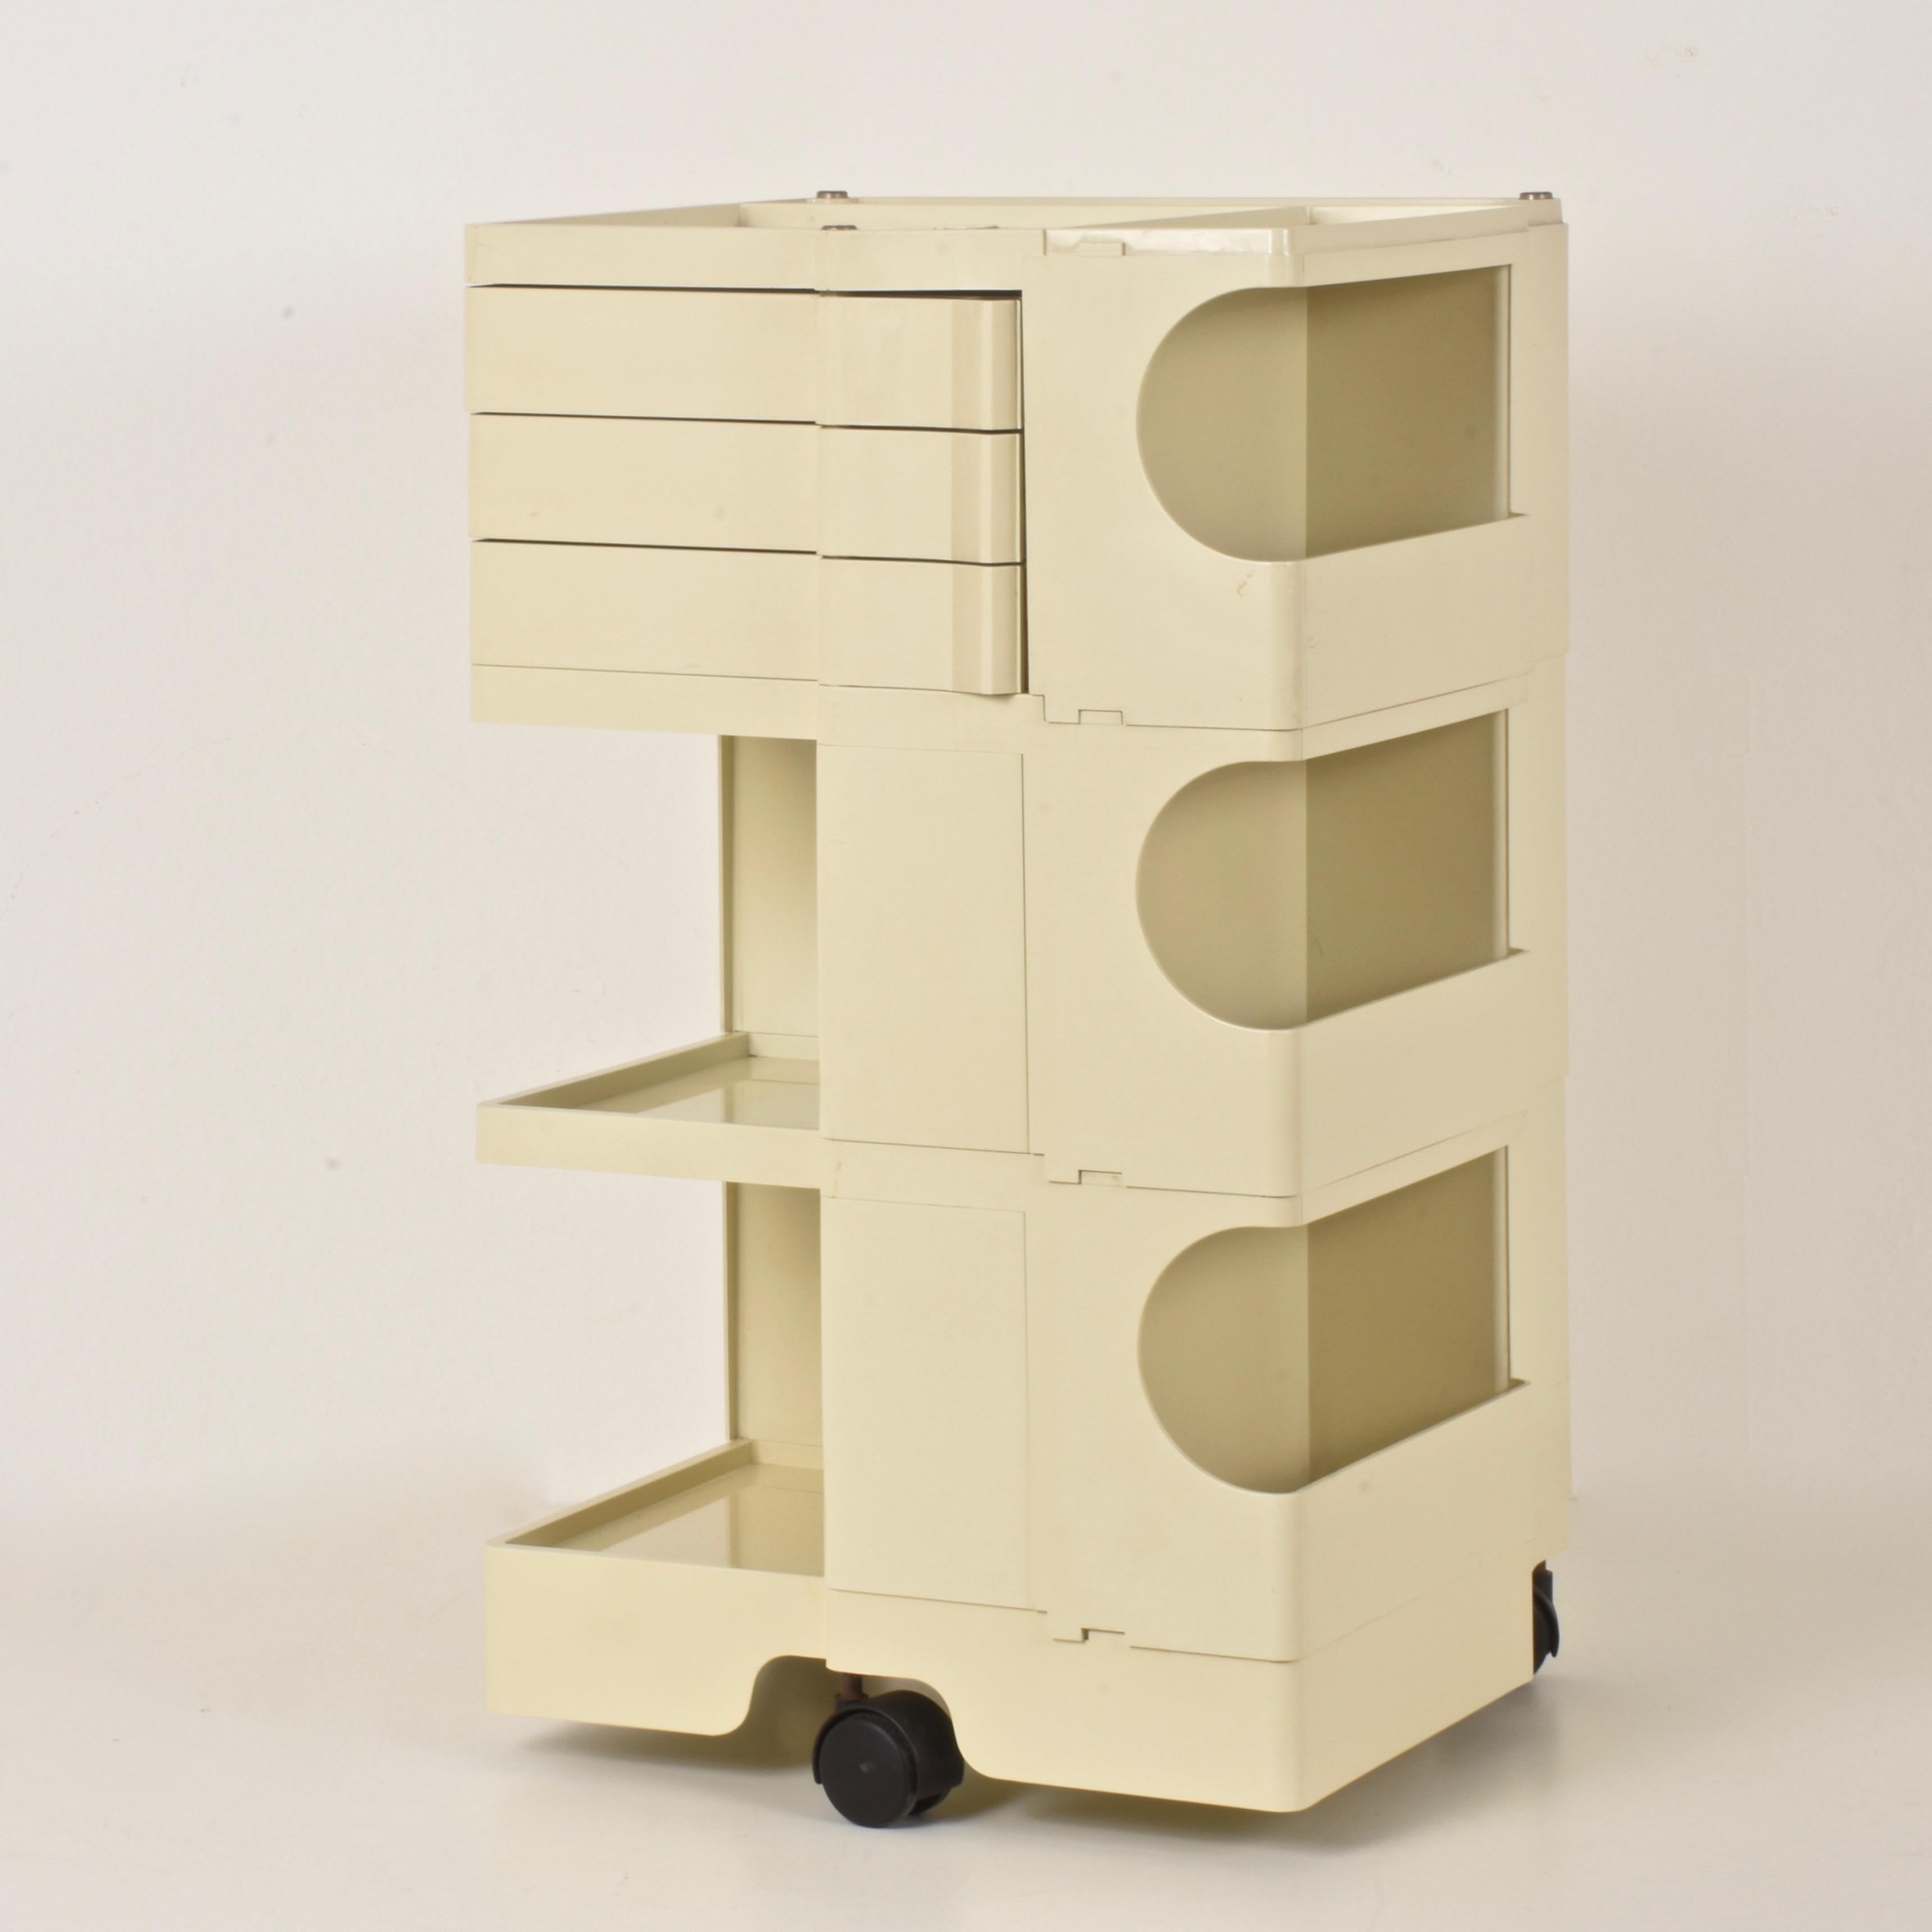 Designed in 1969, Joe Colombo’s iconic Boby 3 portable storage system by Italian manufacturer Bieffeplast makes savvy use of space with its swivel design. This compact caddy is featured in the collection of the Museum of Modern Art in New York, but